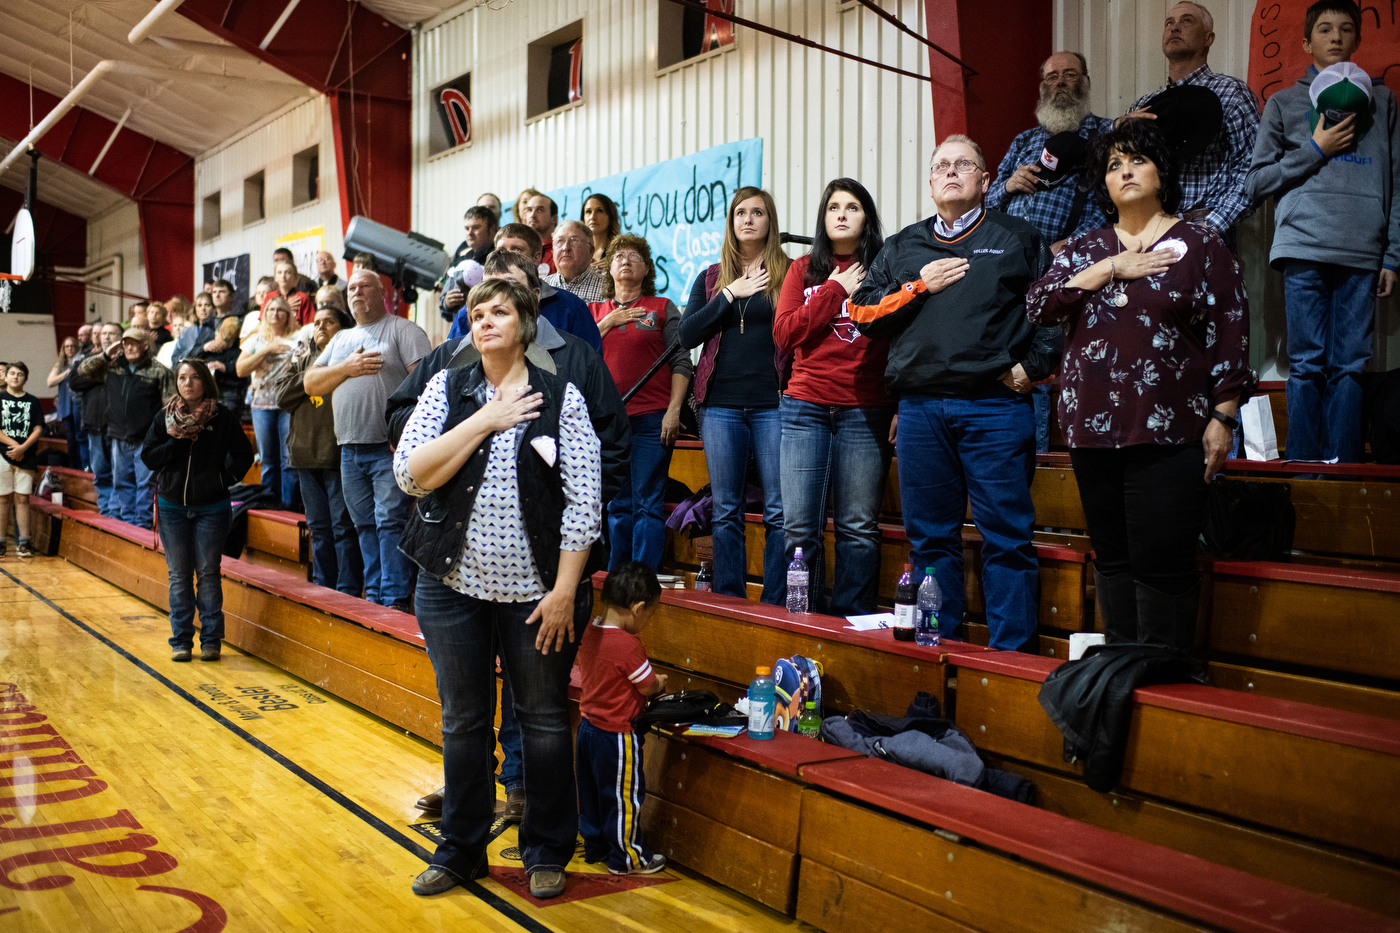  People stand for the national anthem at the Bison Cardinals varsity volleyball game against Mott-Regent High School in Bison, SD. 